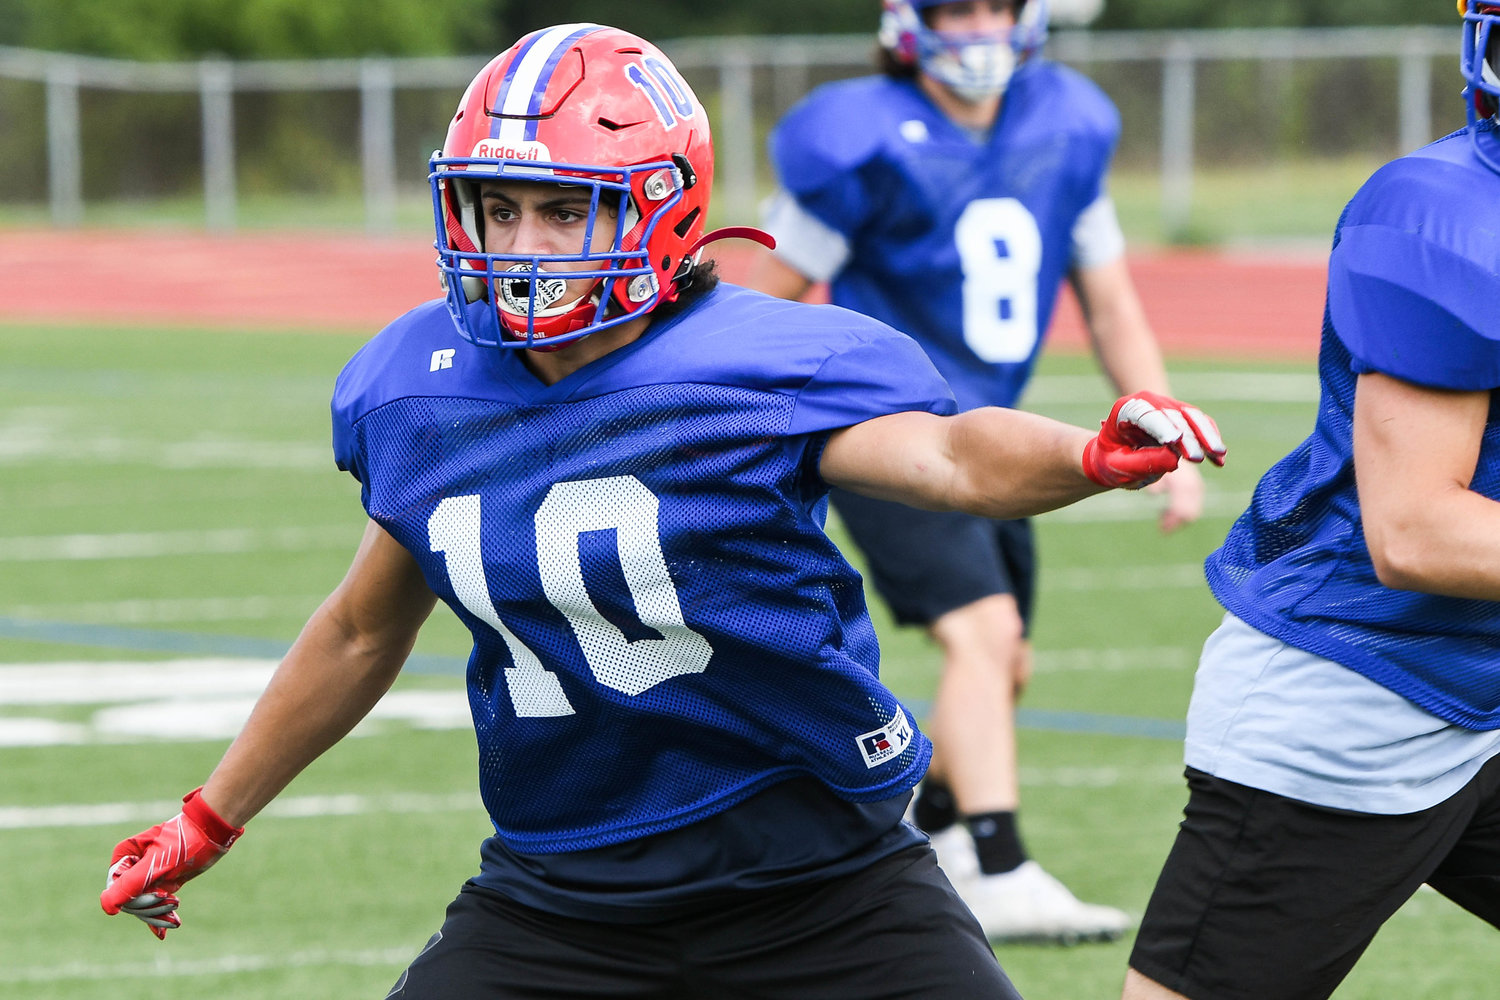 New Hartford’s Tommy Vitagliano defends a receiver during a recent practice. Vitagliano is a top returning starter for the Spartans, who have moved up to Class A in Section III this fall.